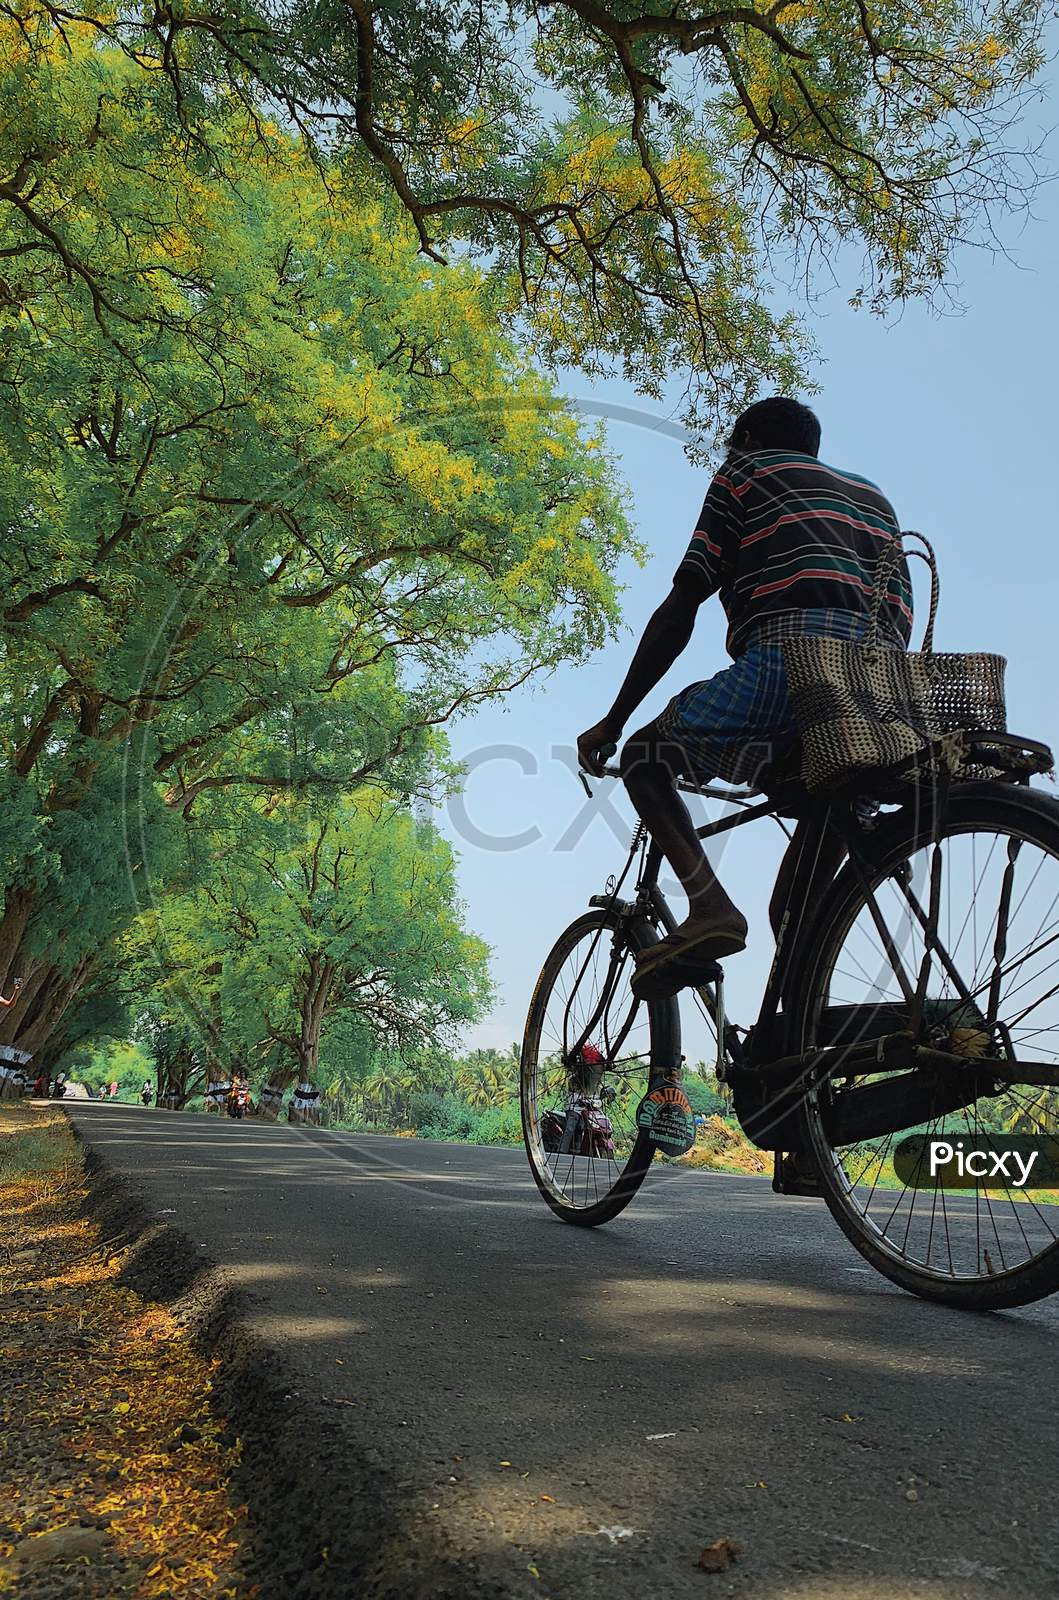 MAN ON CYCLE VILLAGE ROAD POLLACHI